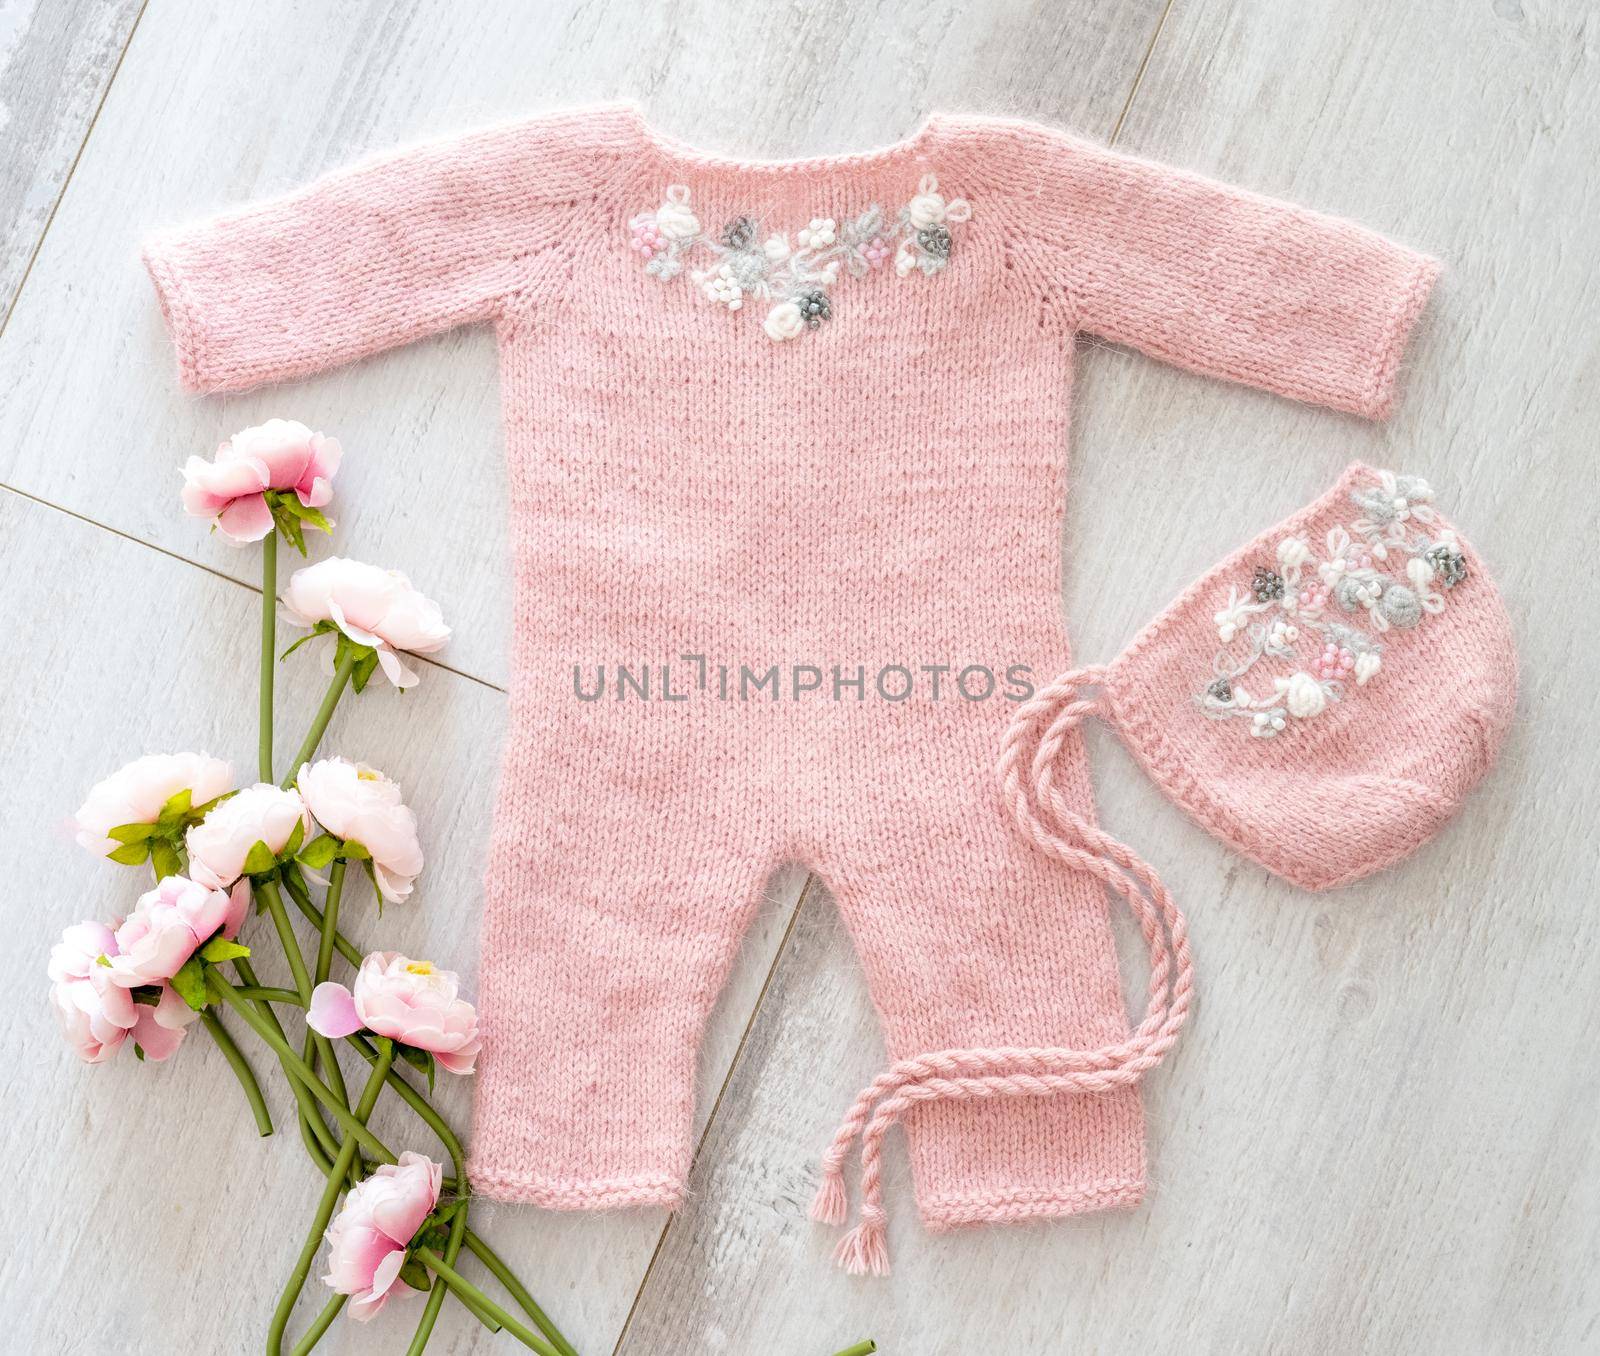 Simple knitted handmade clothes for newborn babies by tan4ikk1